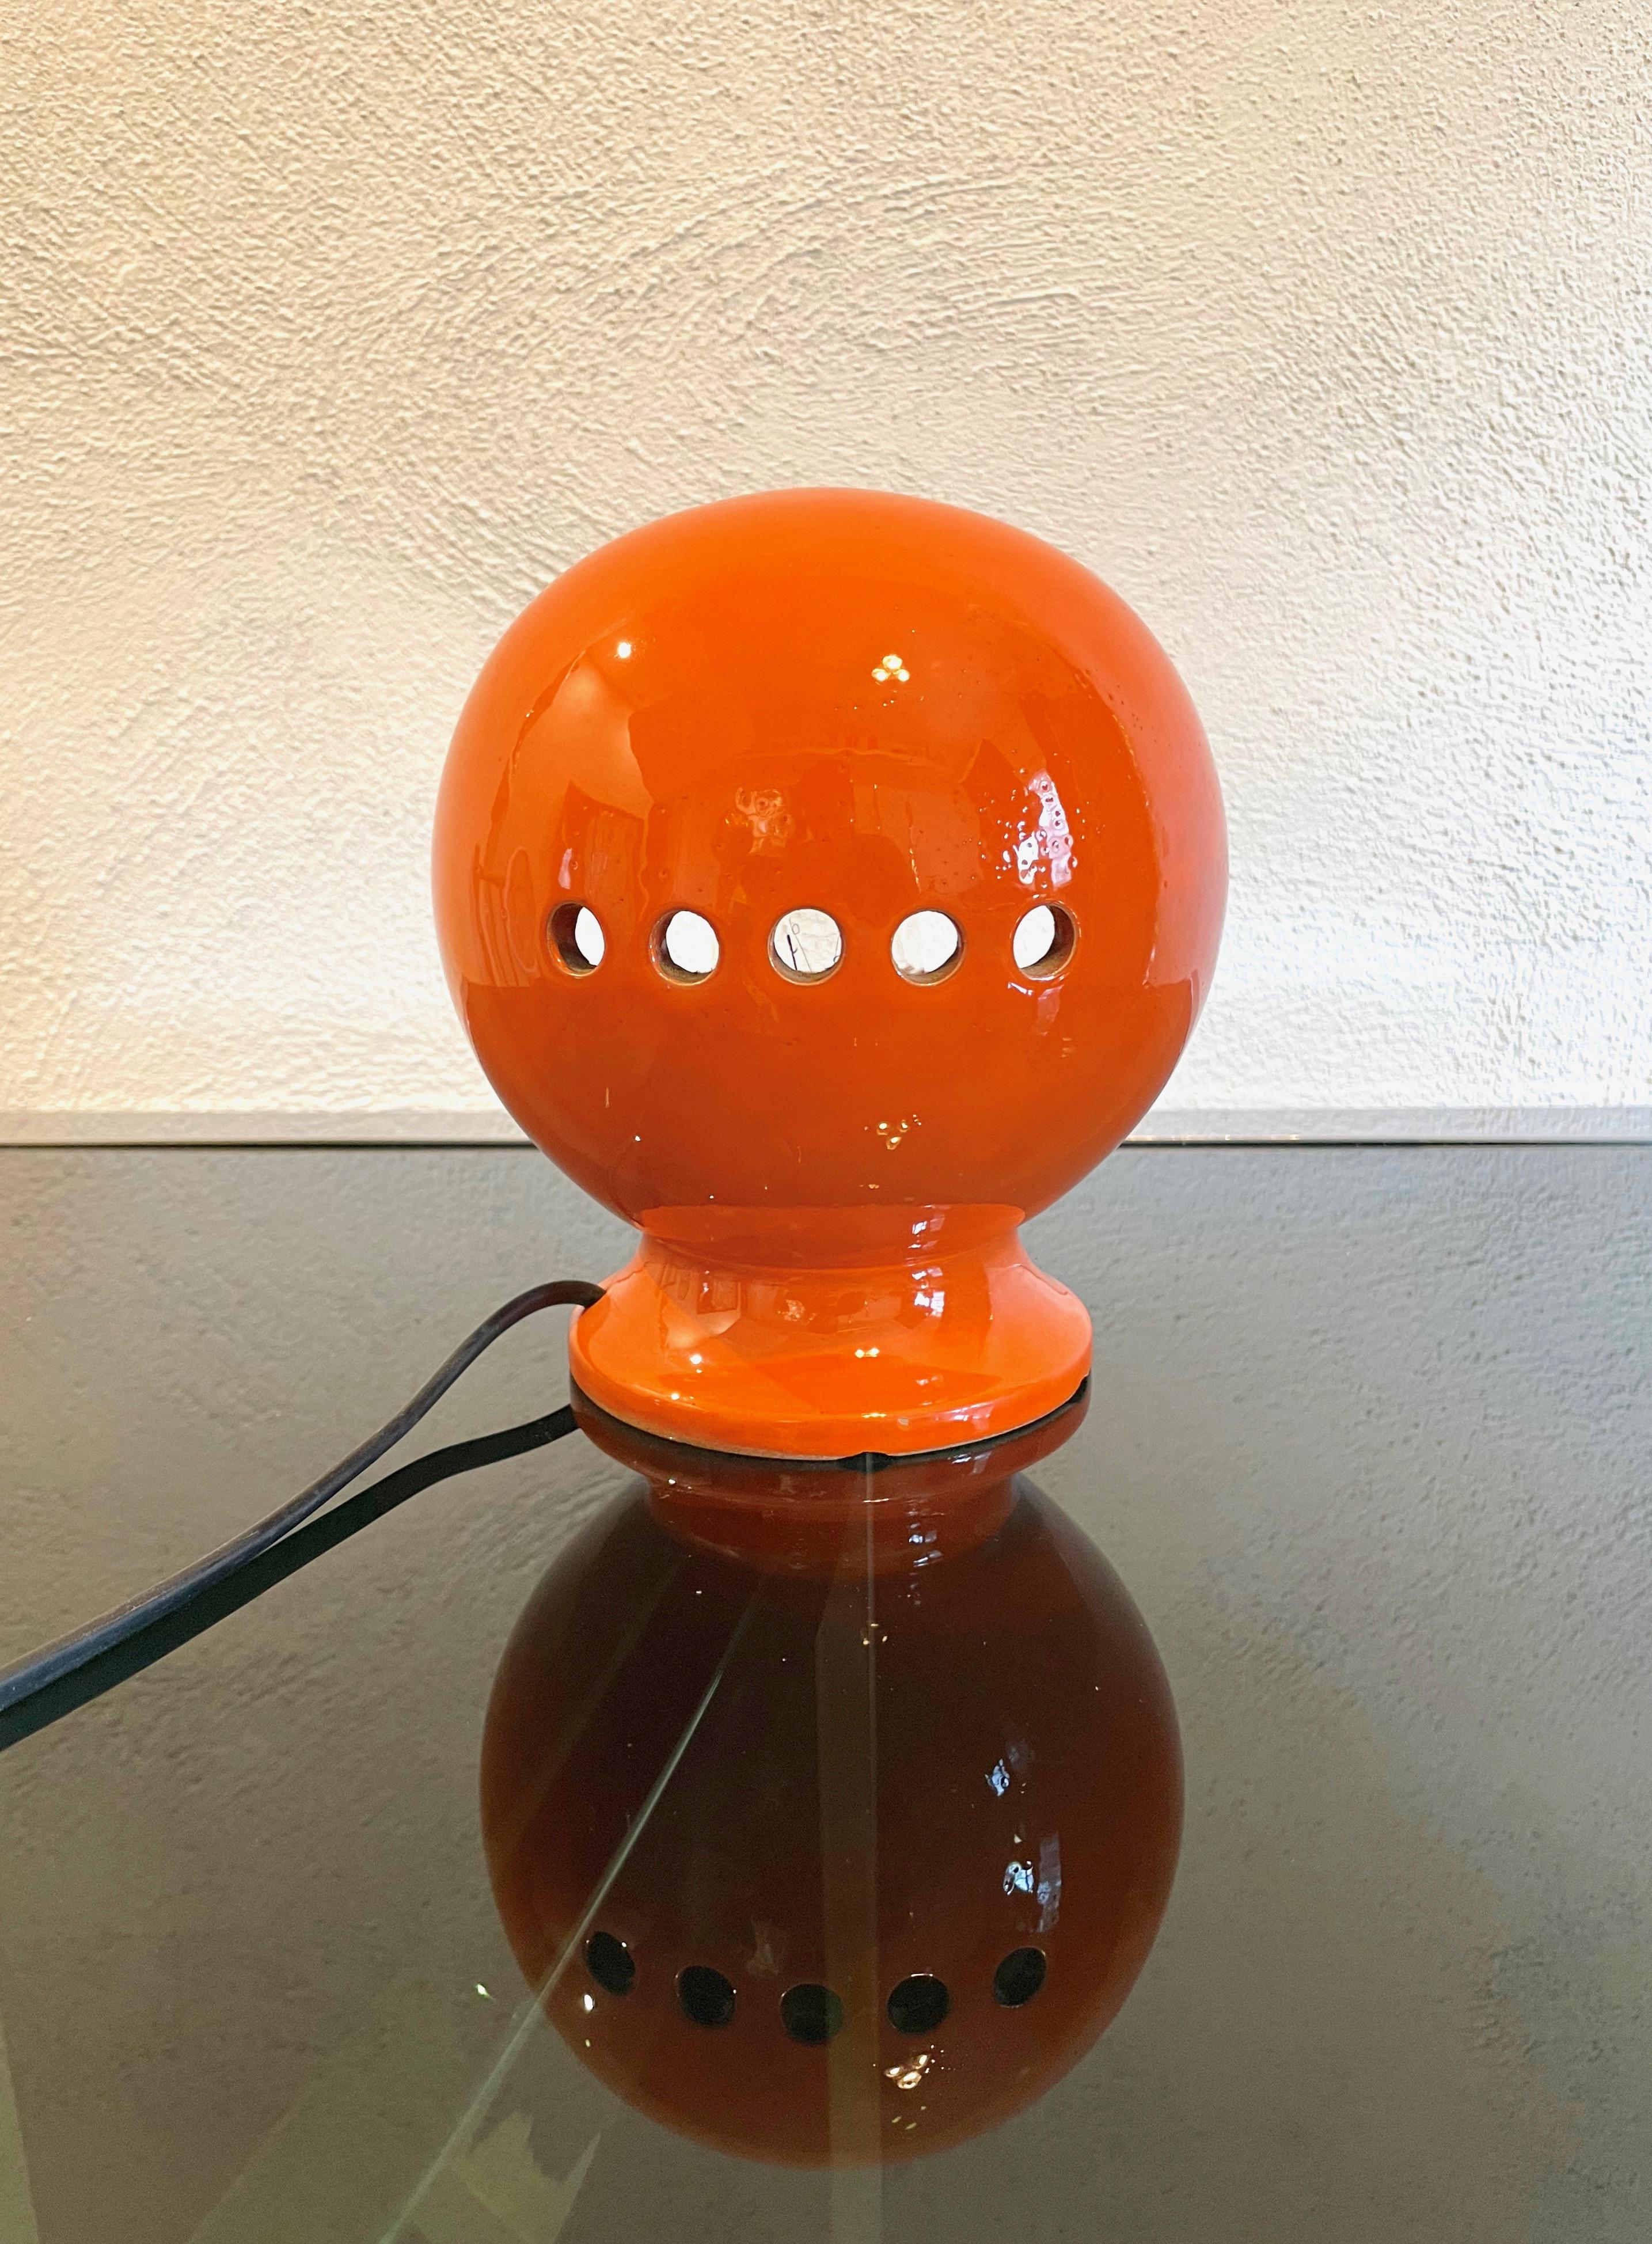 Mid-20th Century Space Age Orange Ceramic Table Lamp by Enzo Bioli for Il Picchio, Italy 1960s For Sale